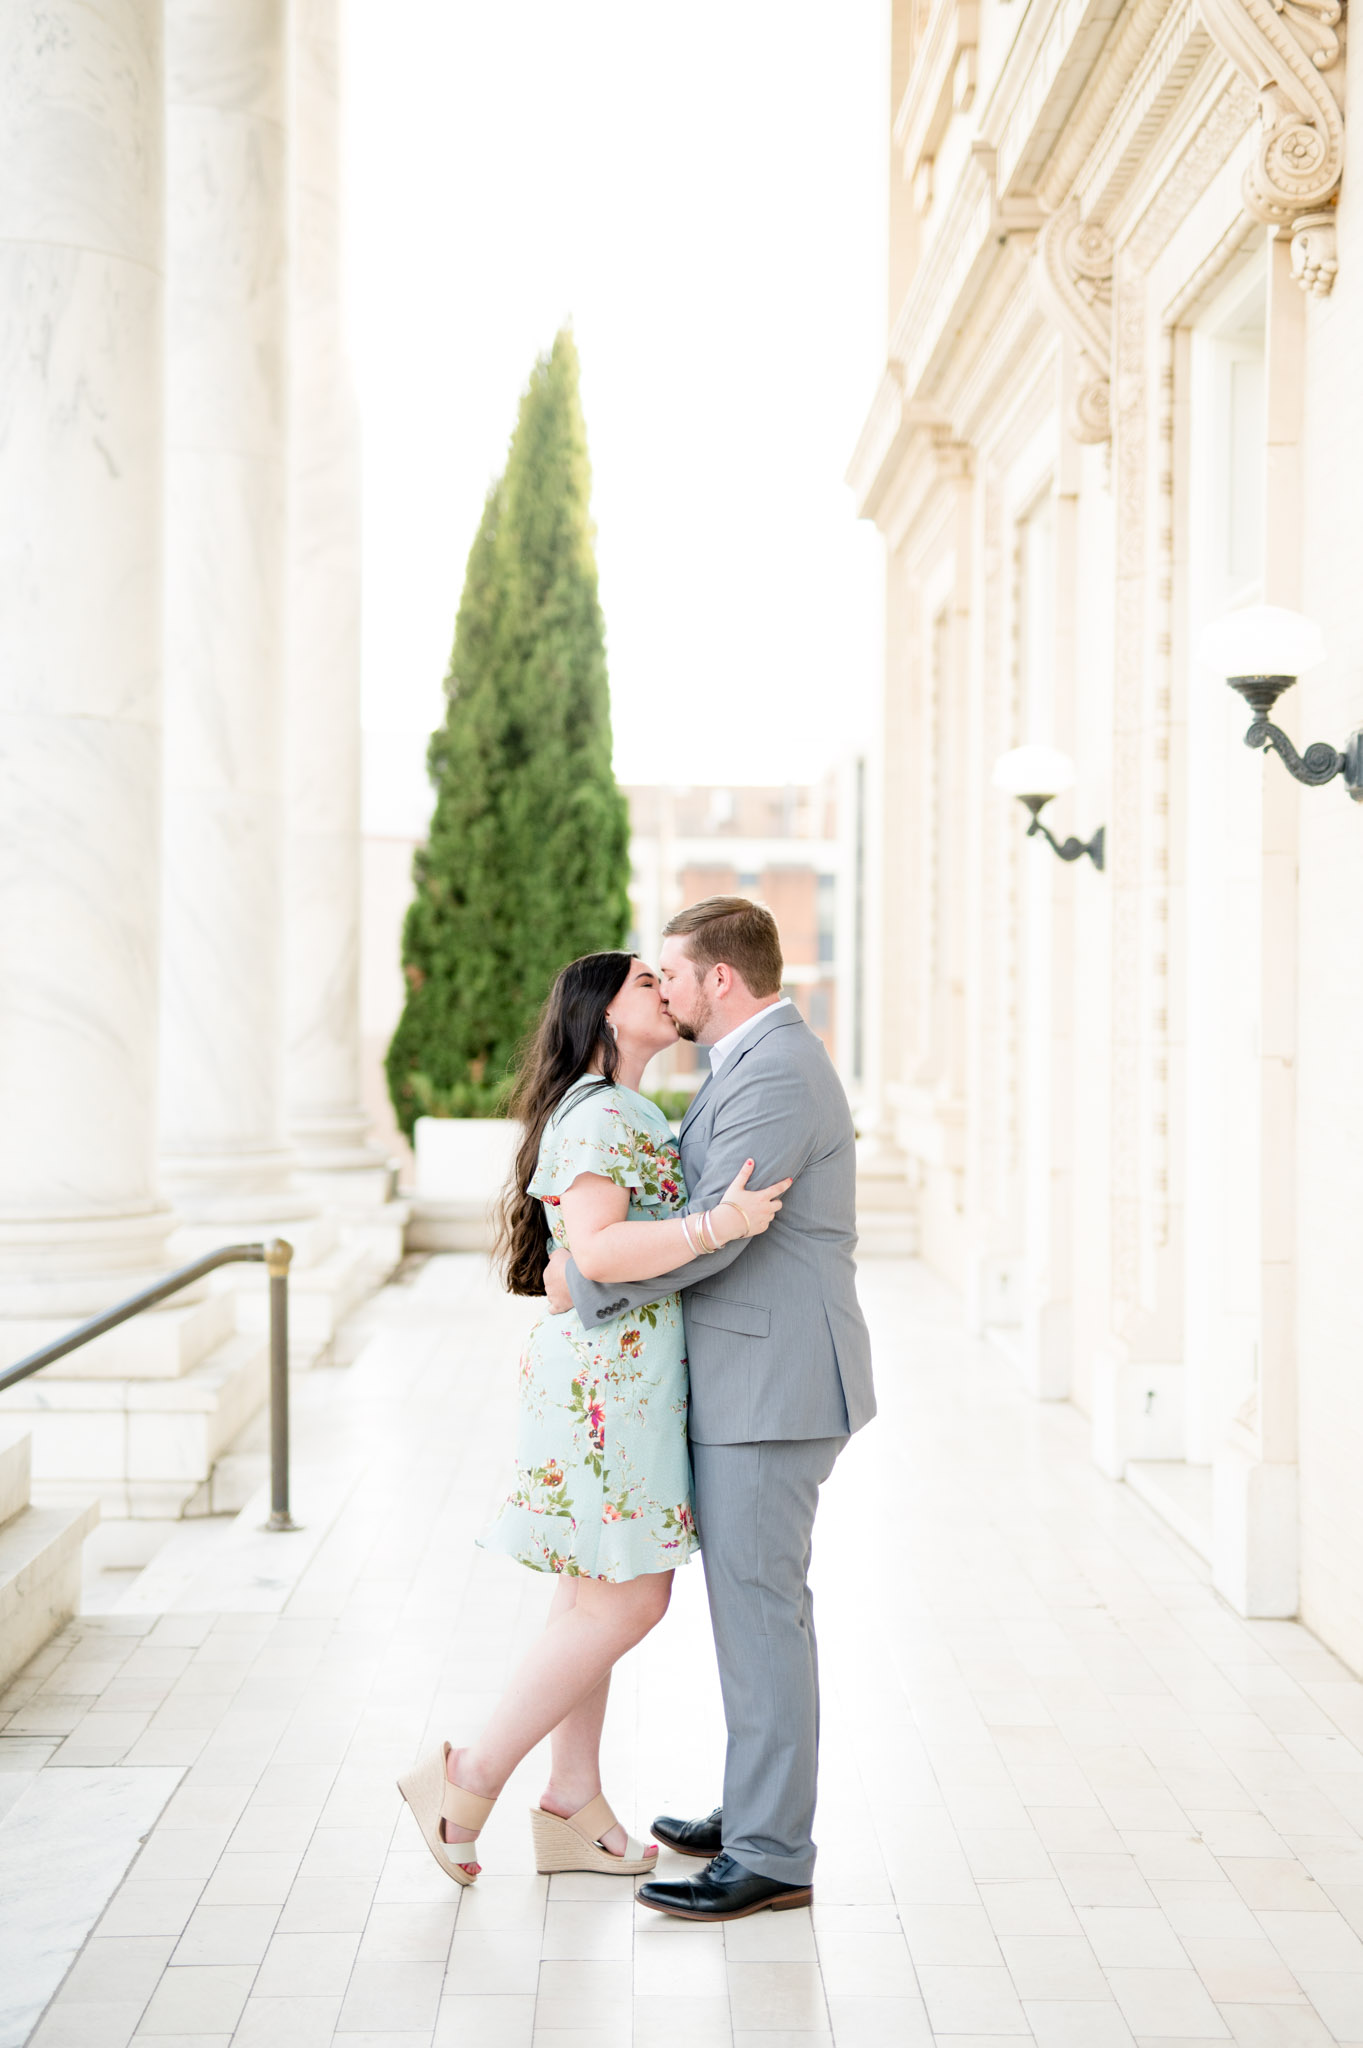 Engaged couple kiss in marble atrium.